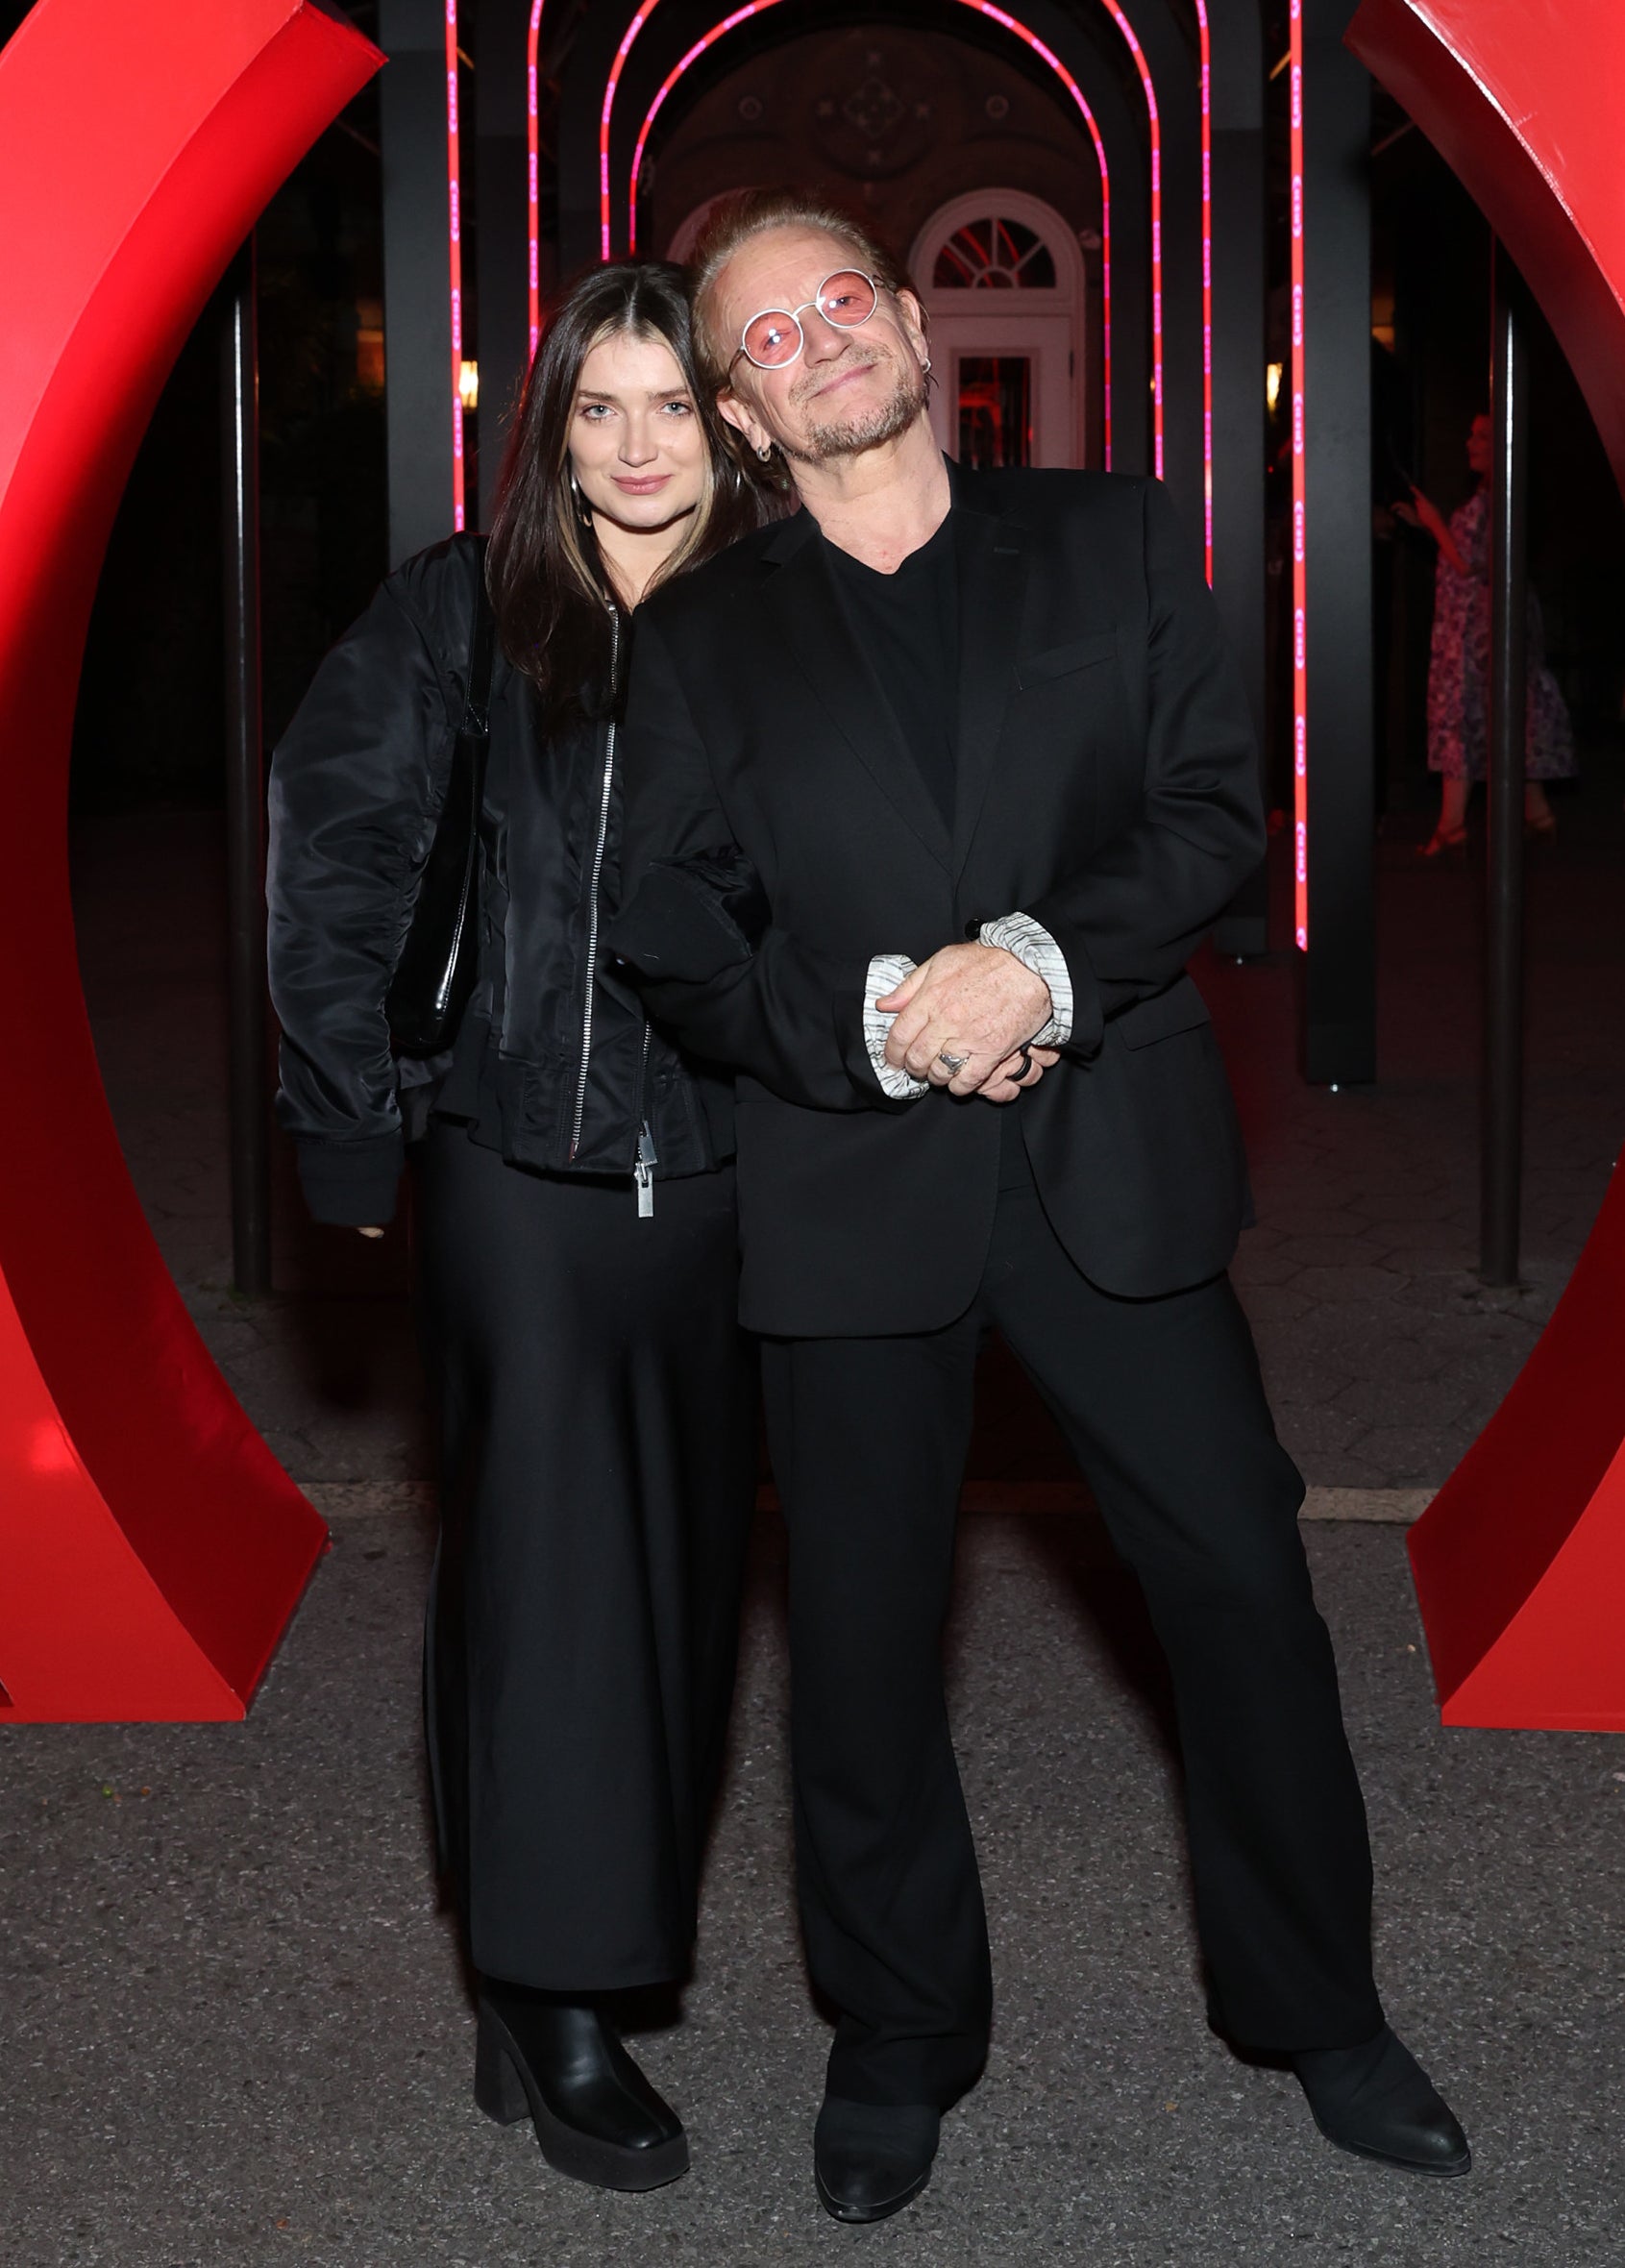 Eve and Bono standing together, both dressed in black